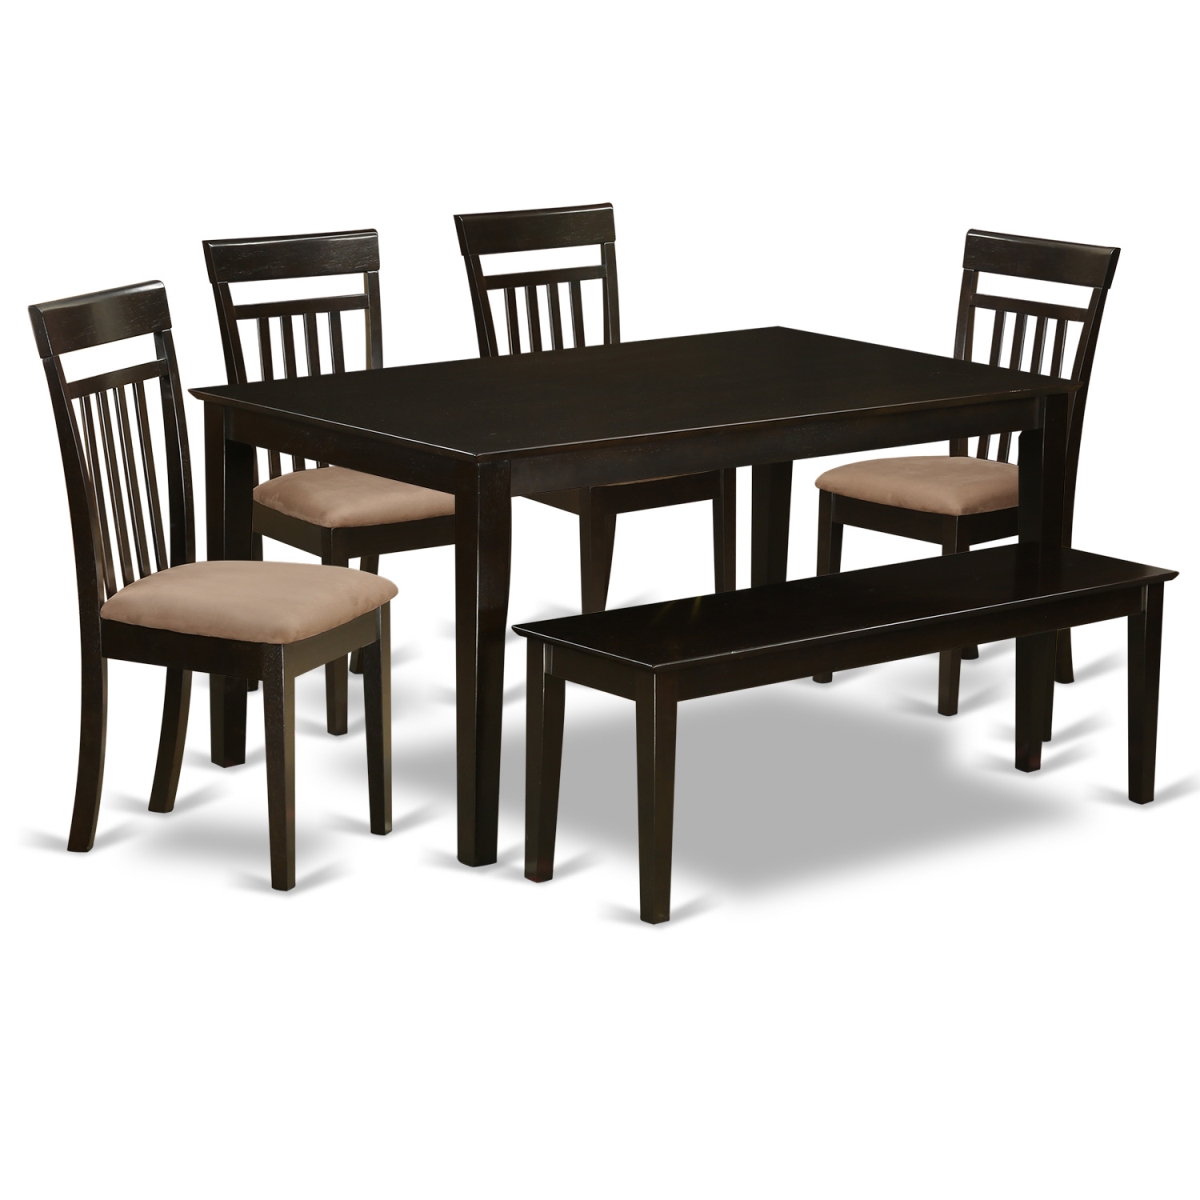 Picture of East West Furniture CAP6S-CAP-C Dining Table Set - Solid Top Kitchen Table & 4 Chairs Plus One Bench - 6 Piece